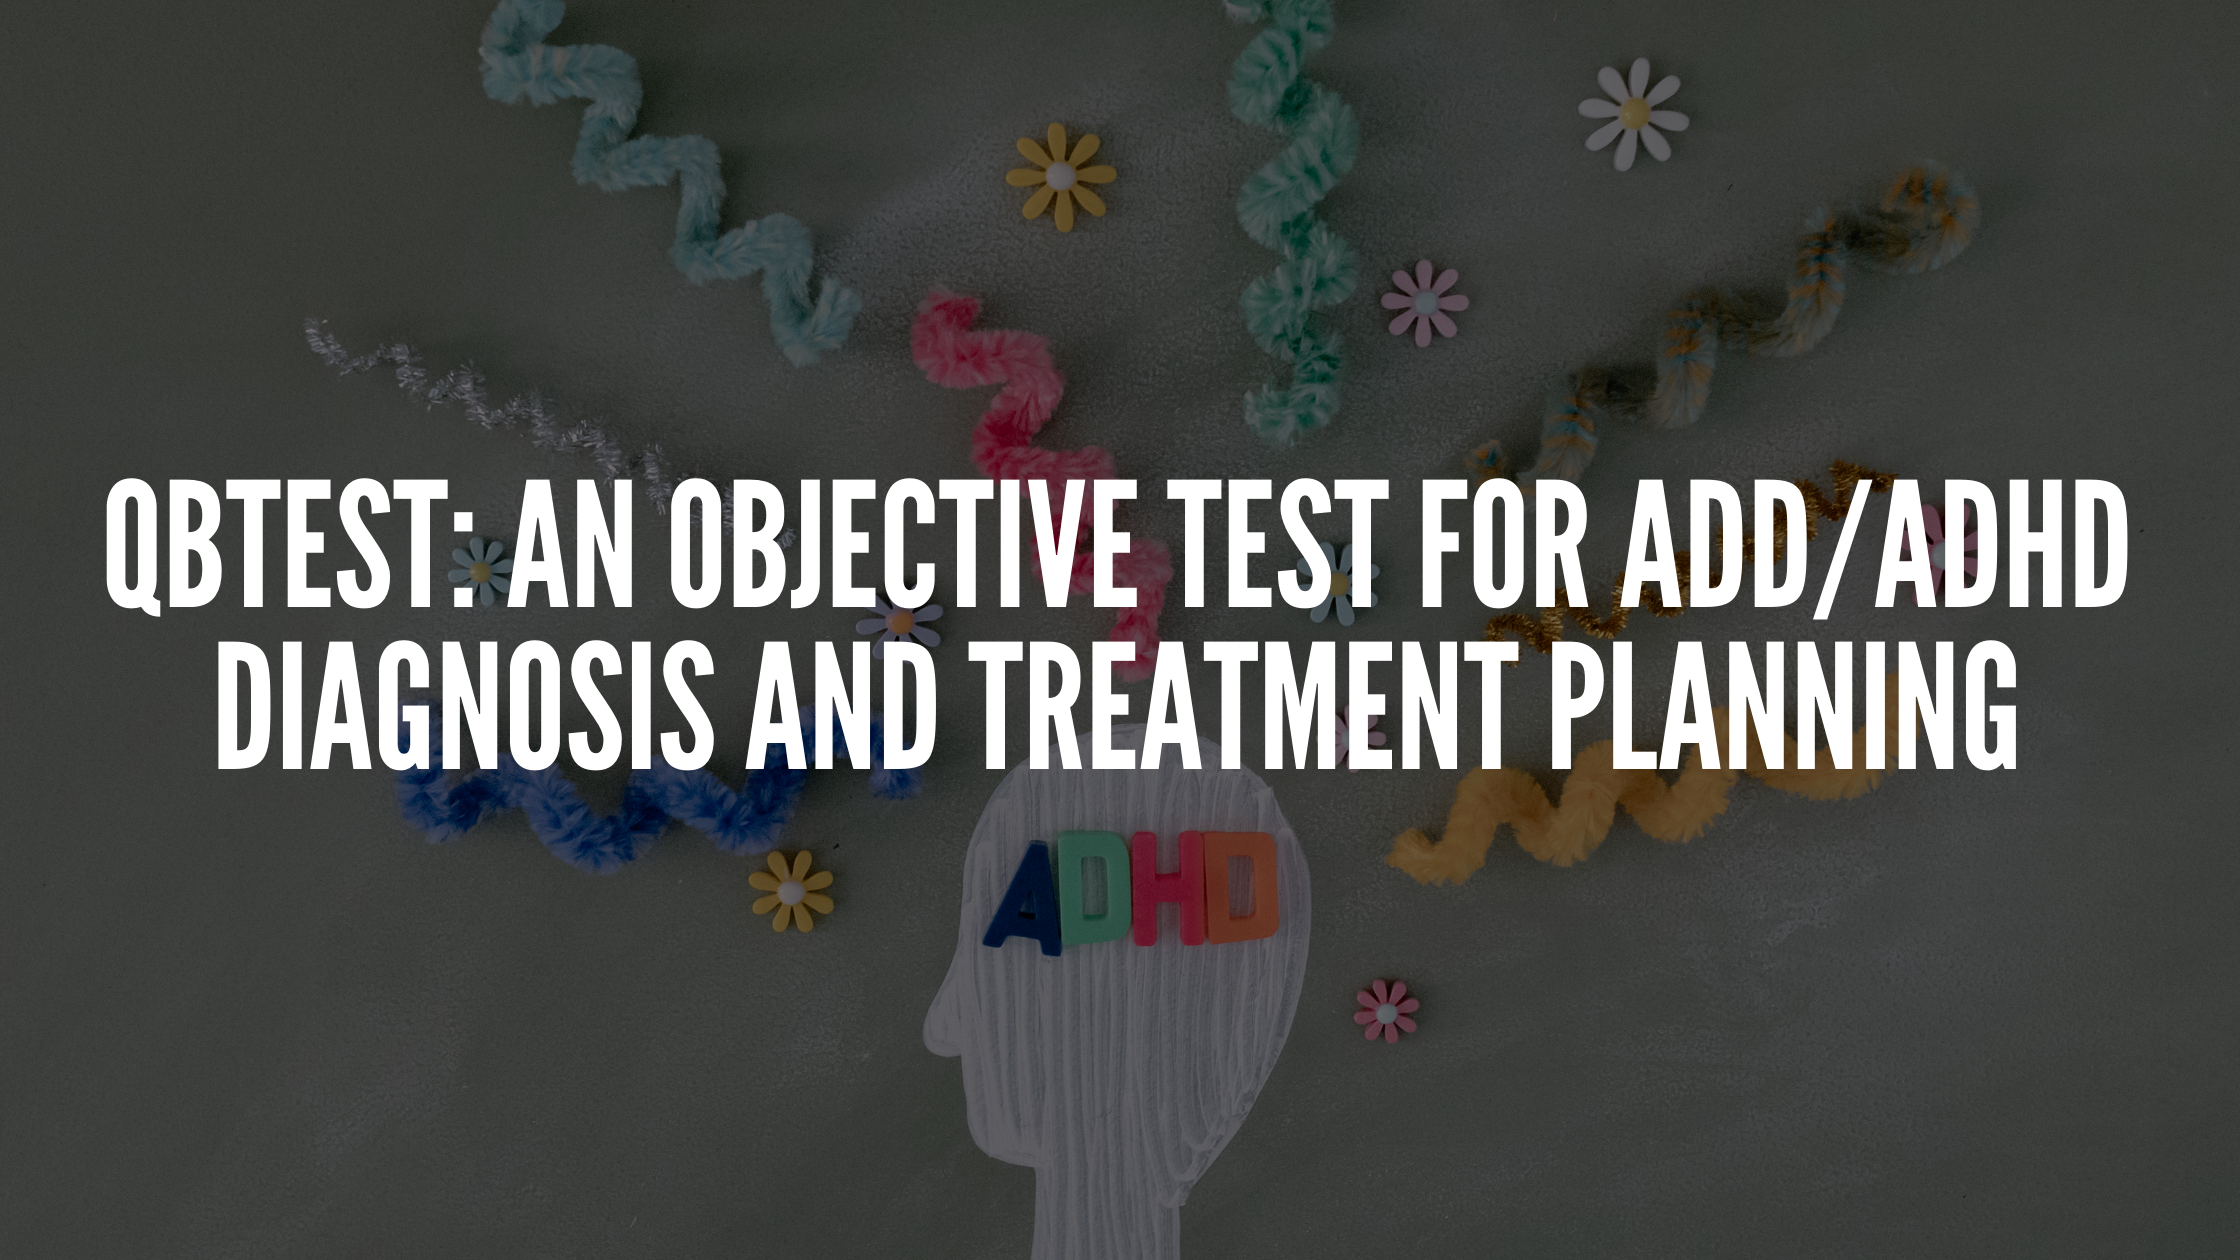 You are currently viewing QbTest: An Objective Test for ADD/ADHD Diagnosis and Treatment Planning